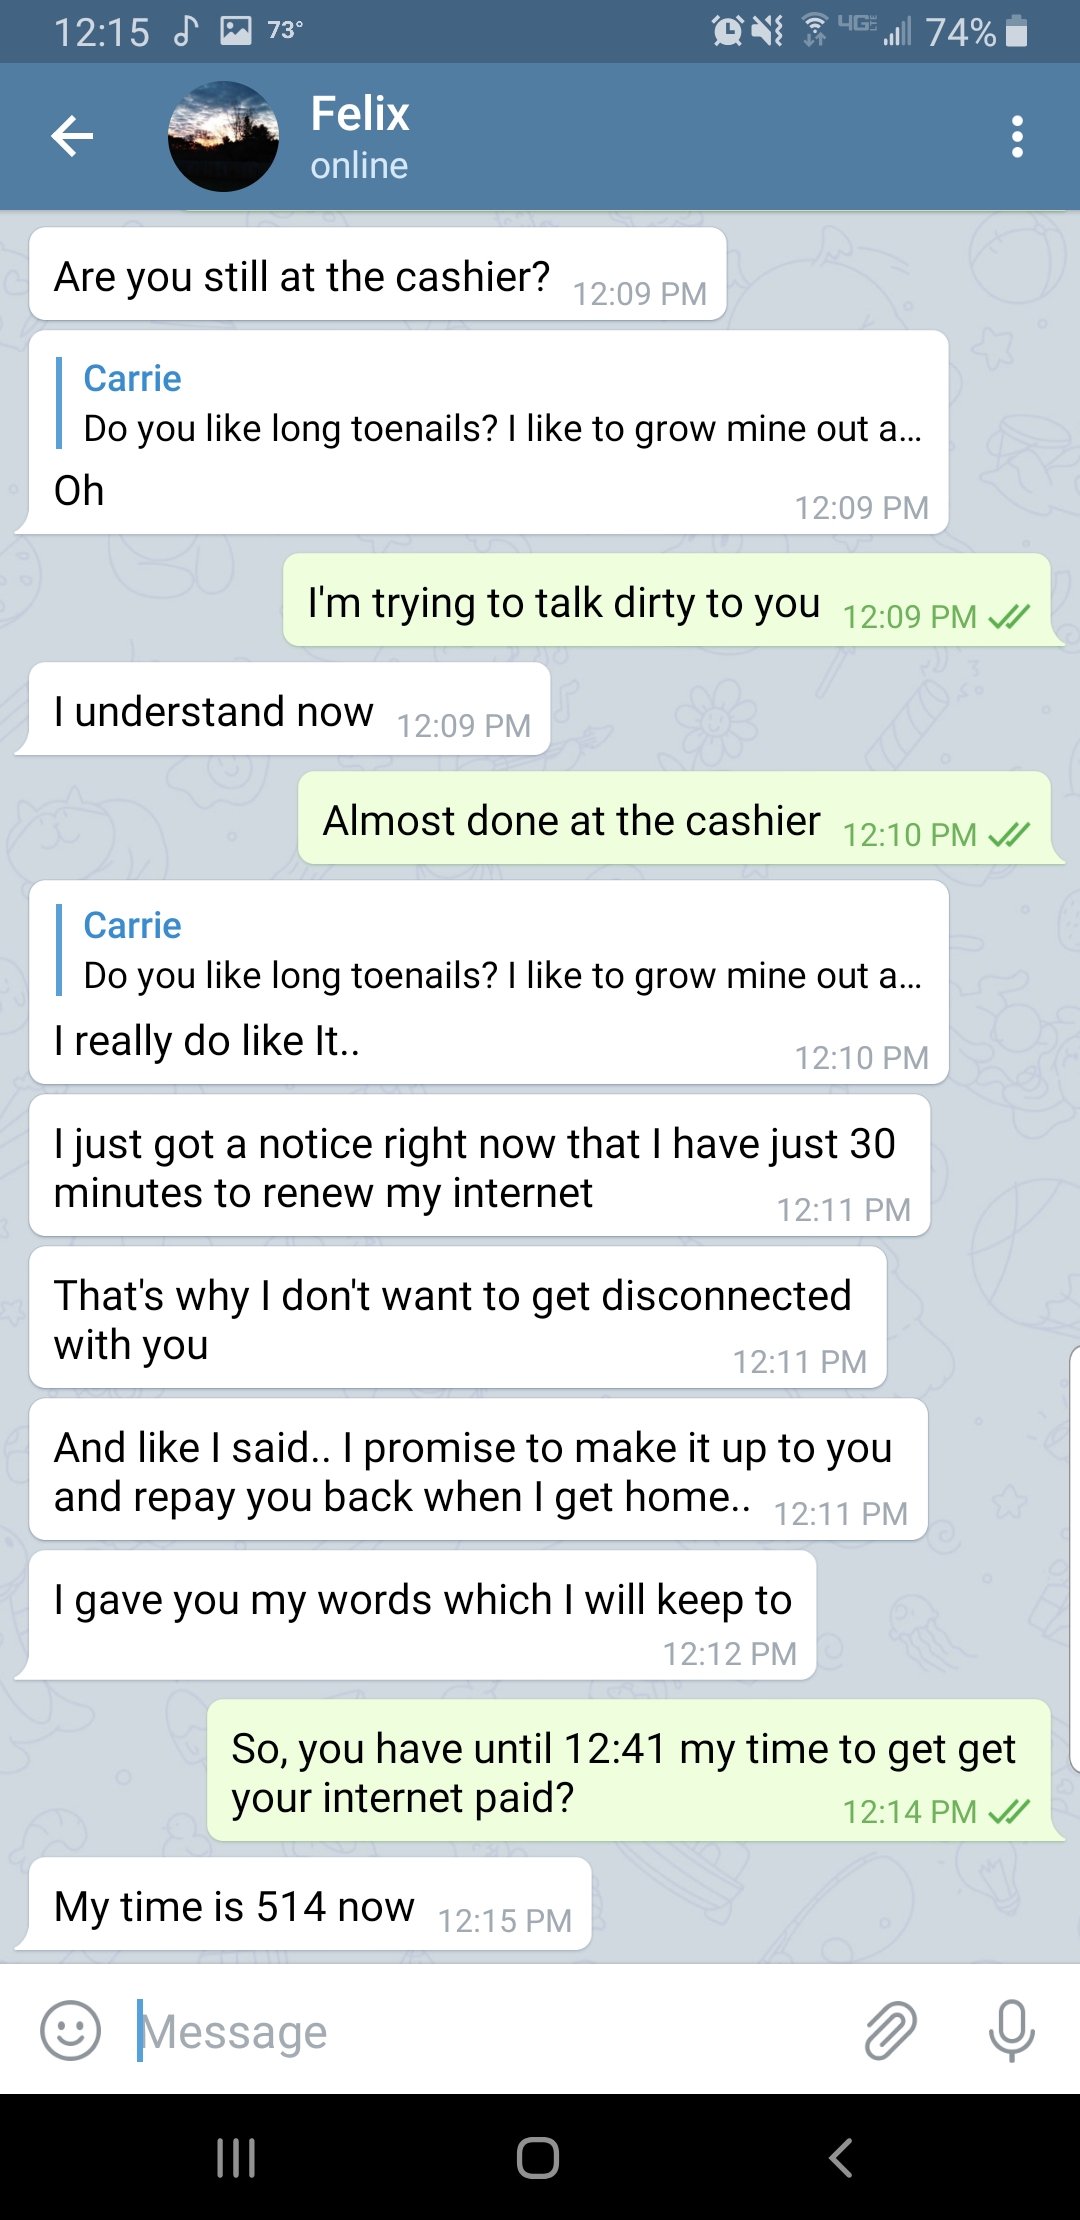 screenshot - 12.15 Ok 74% Felix online Are you still at the cashier? Do you long toenails? I to grow mine out a Oh I'm trying to talk dirty to you I understand now Almost done at the cashier Carrie Do you long toenails? I to grow mine out a... I really do